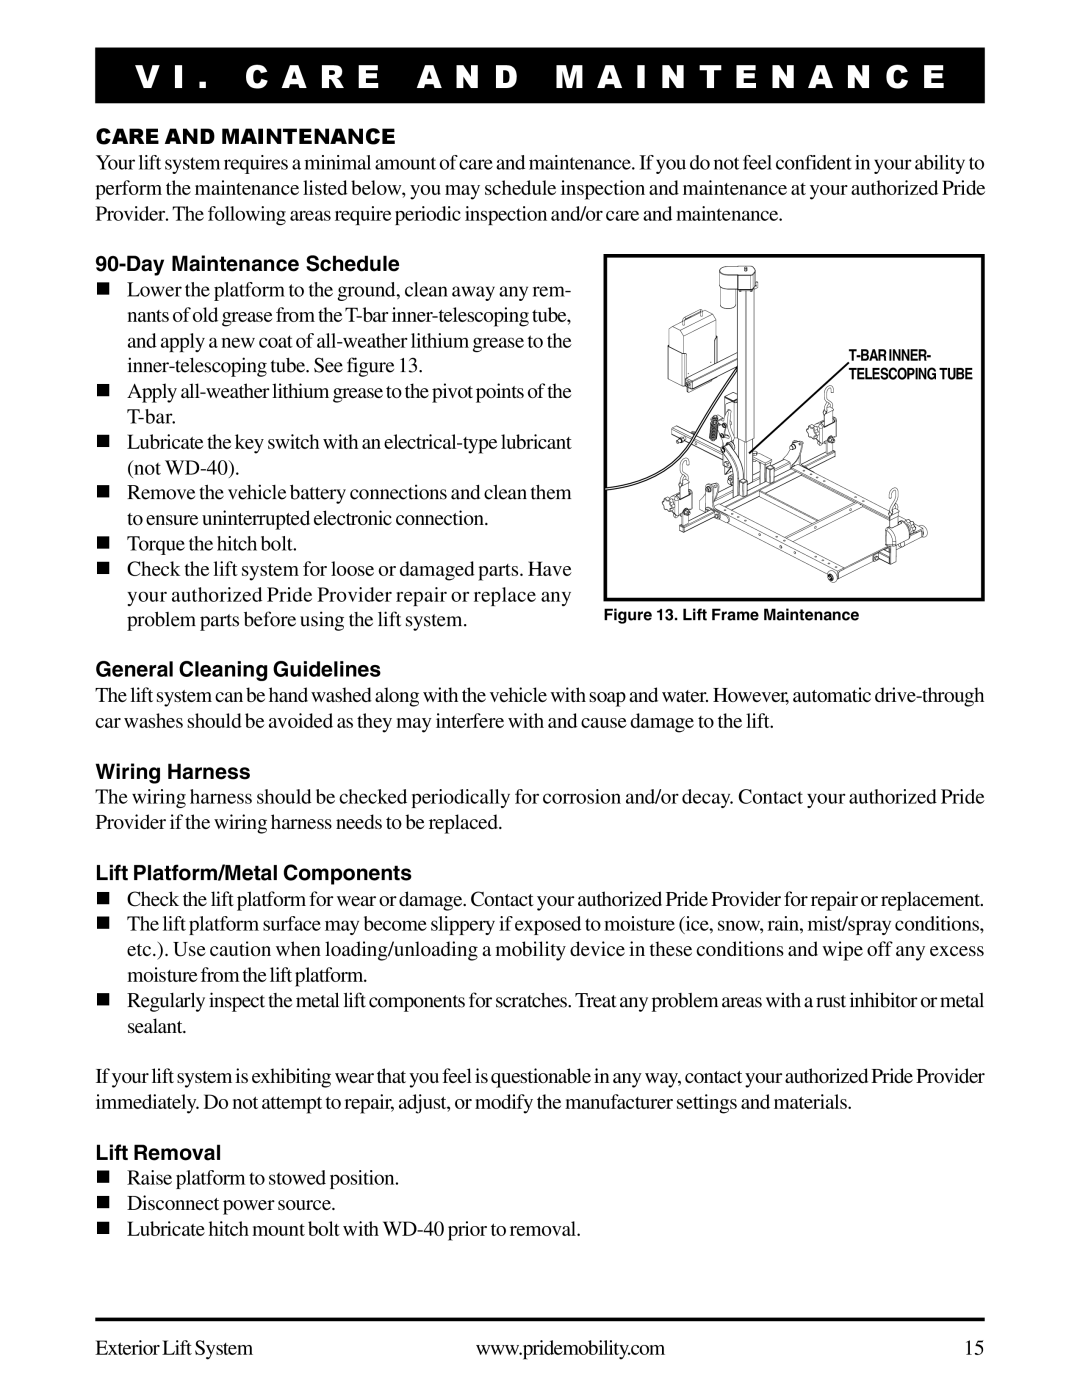 Pride Mobility Exterior Lift System manual V I . C A R E A N D M A I N T E N A N C E, Care And Maintenance, Wiring Harness 